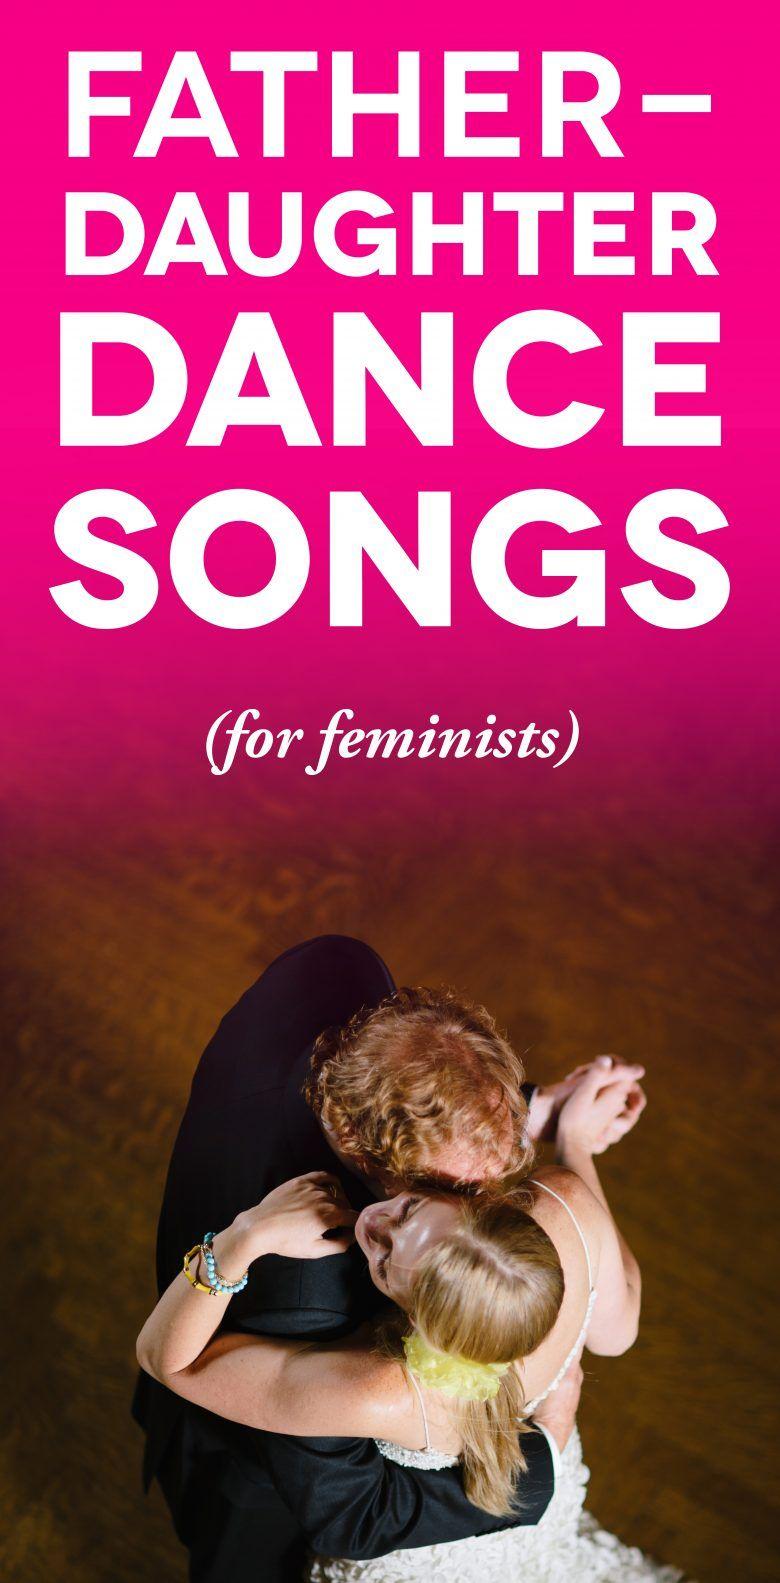 Father Daughter Dance Songs (For Feminists). Father daughter dance